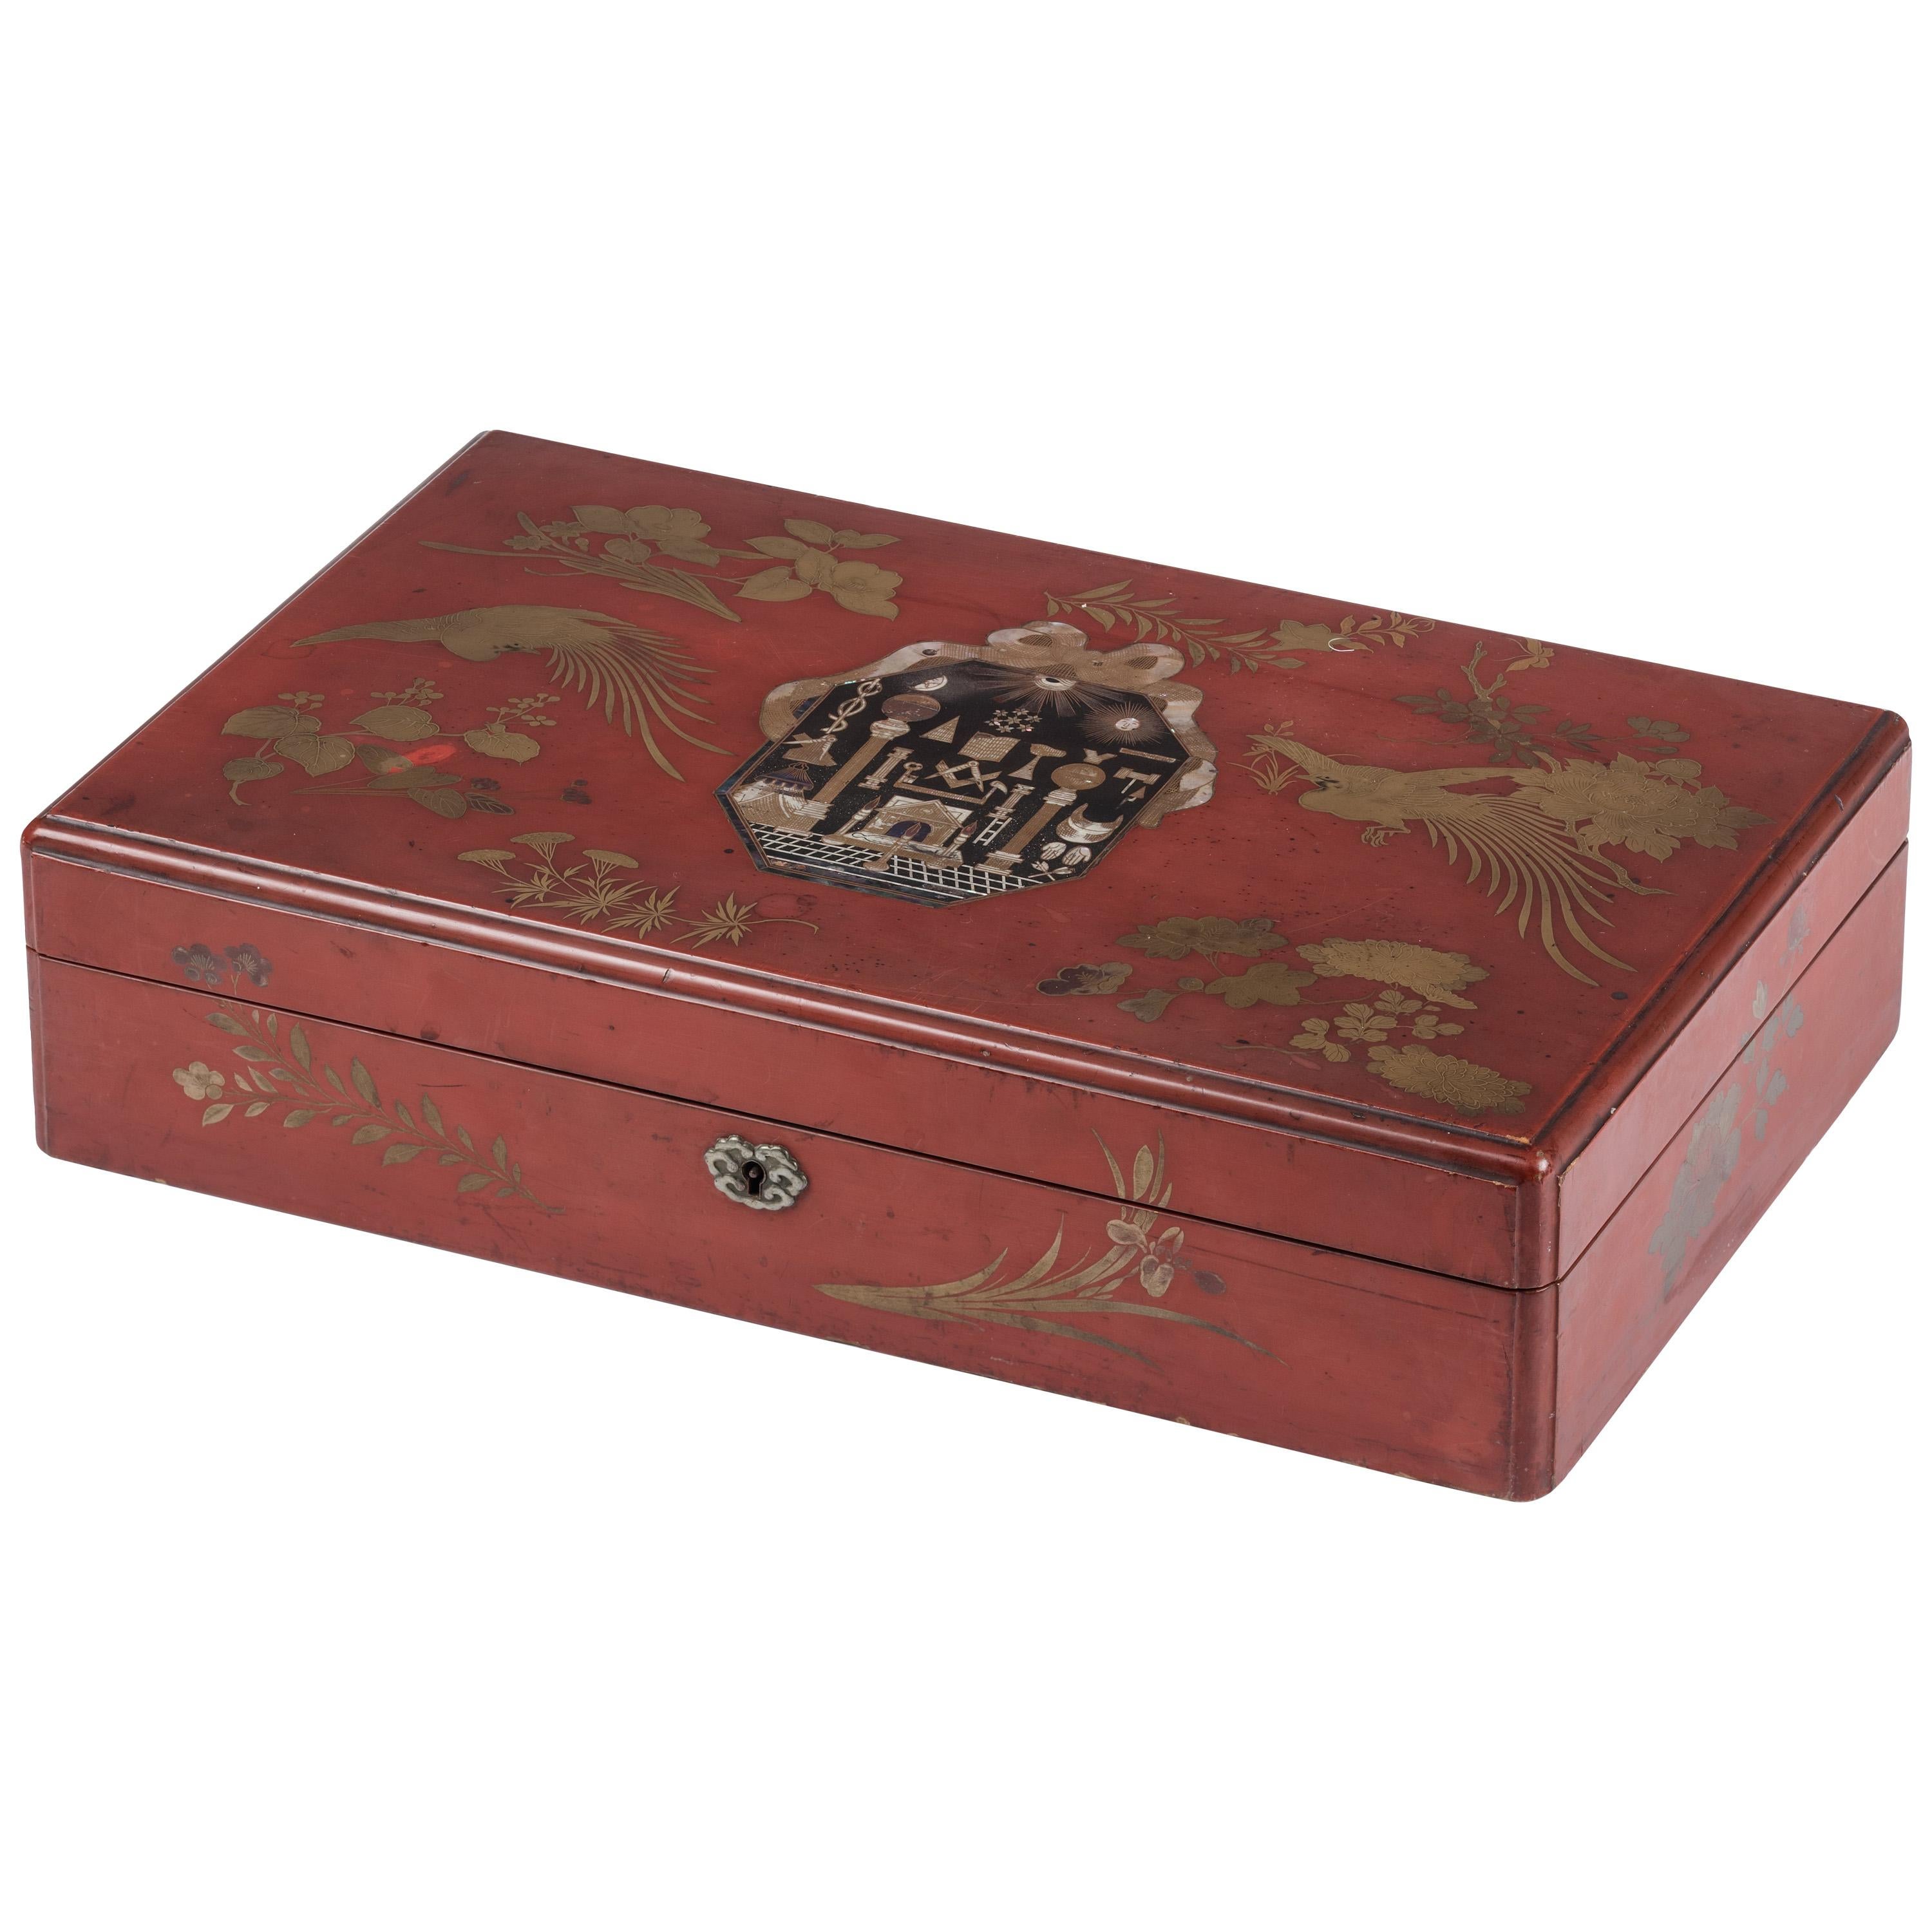 Fine Japanese Export Red Lacquer Box with Masonic Symbols, circa 1800 For Sale